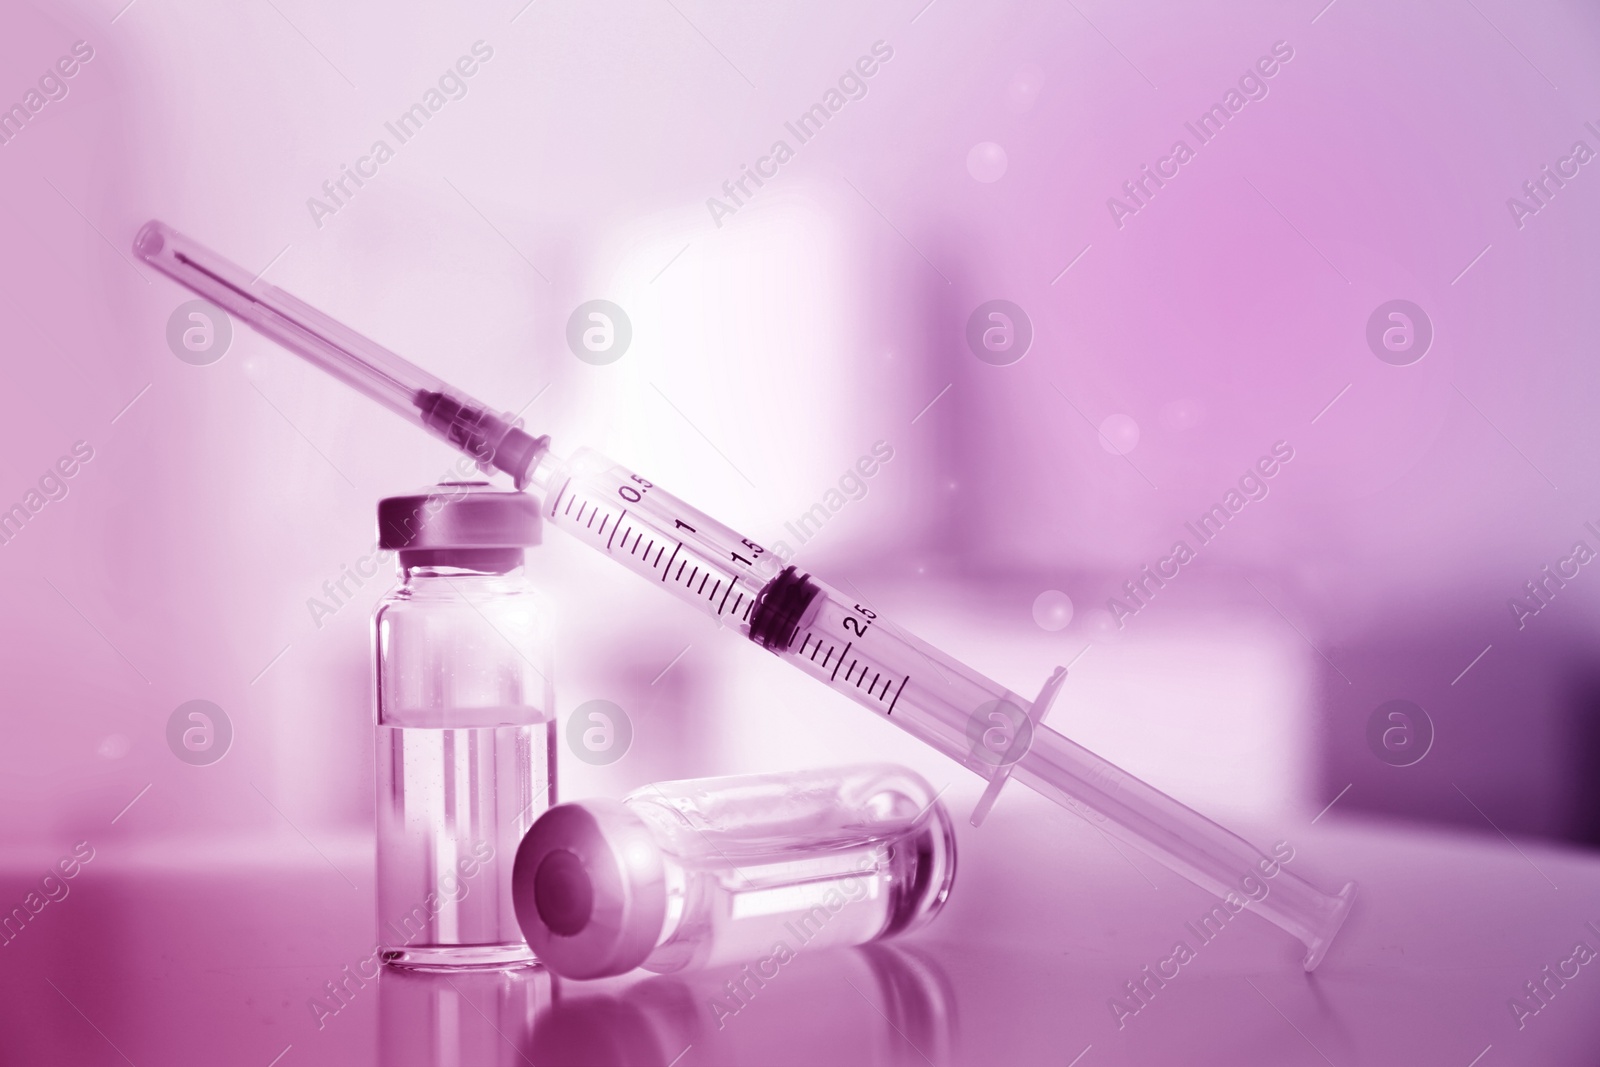 Image of Syringe with vials of medicine on table